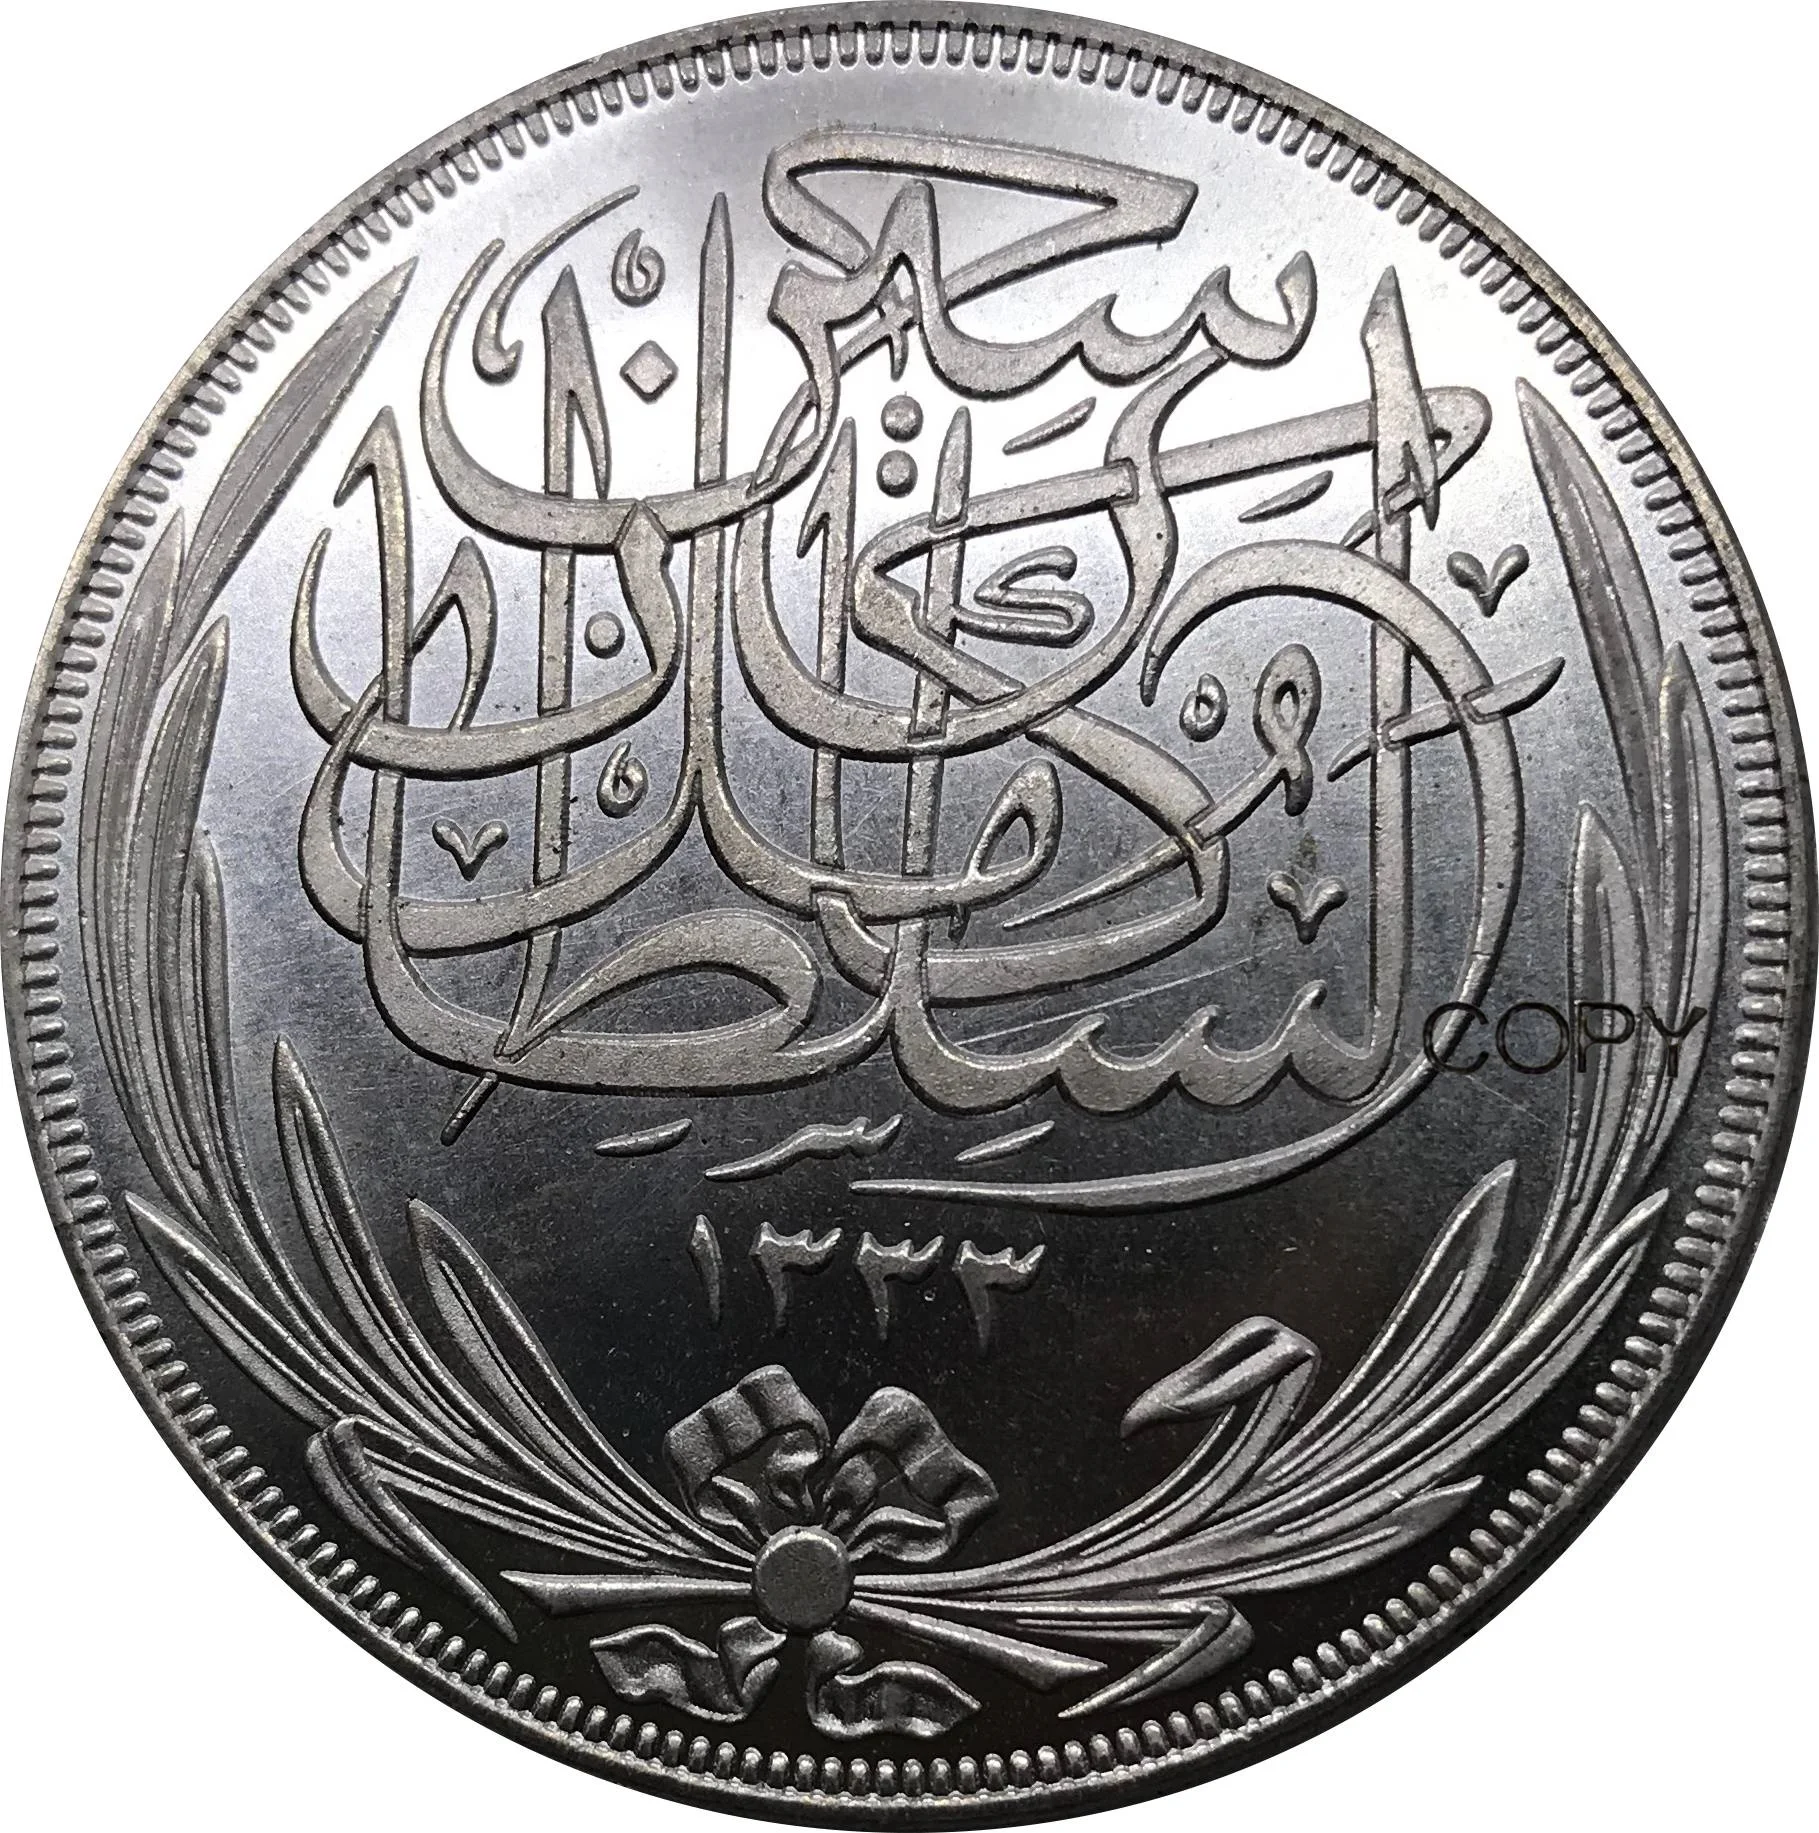 

Egypt 1917 Coin 20 Qirsh Piastres Fuad I Trial Strike Metal Cupronickel Plated Silver Souvenir Copy Coins